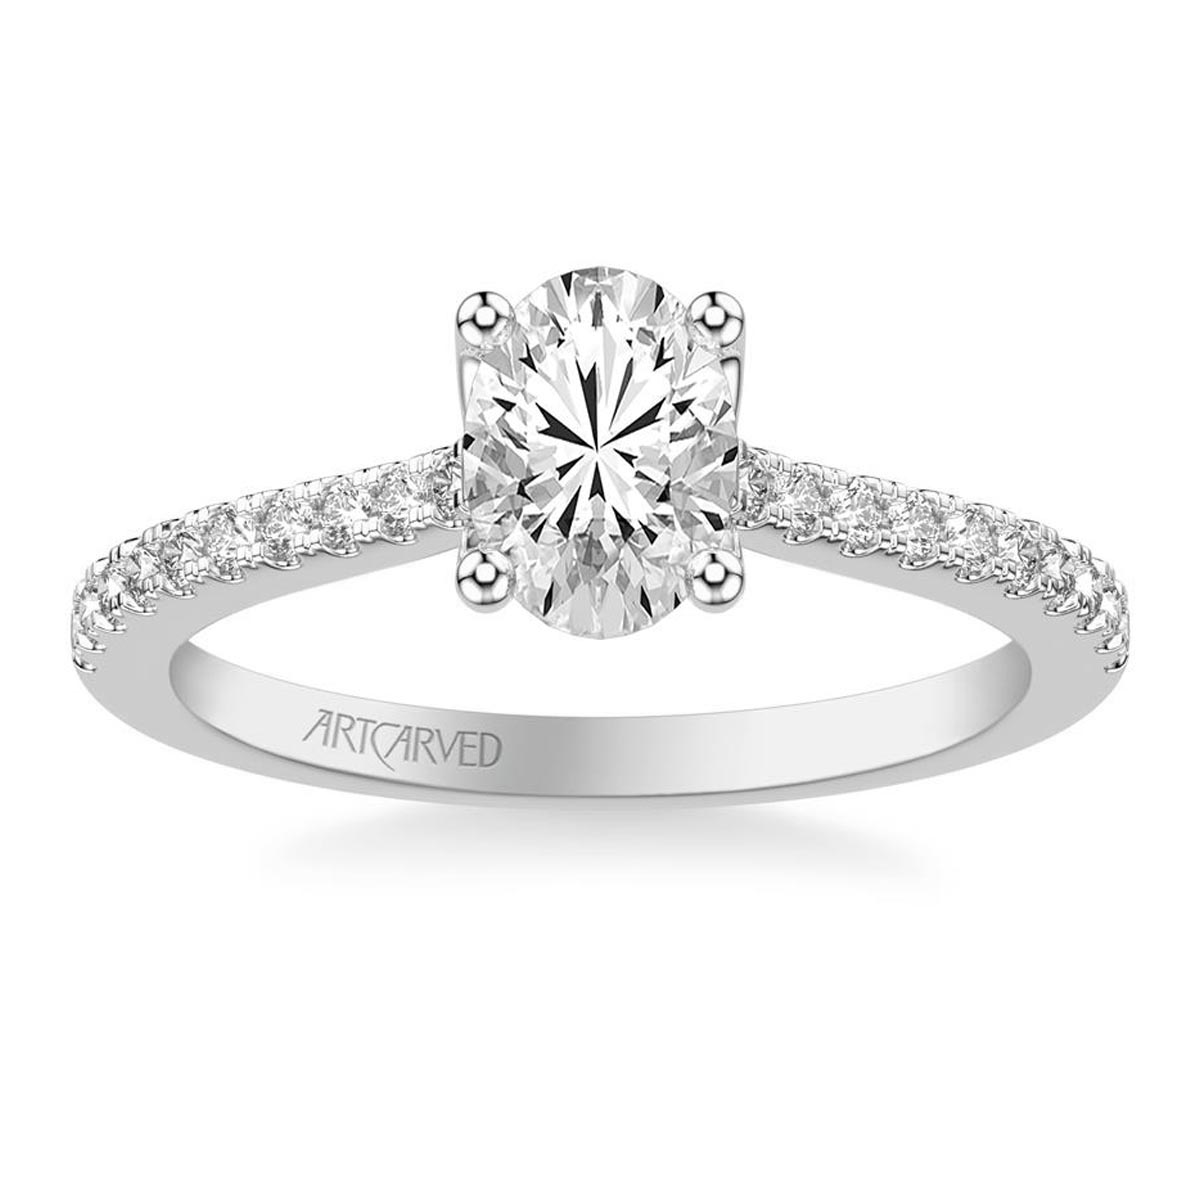 Artcarved Diamond Engagement Ring Setting in 14kt White Gold (1/4ct tw)